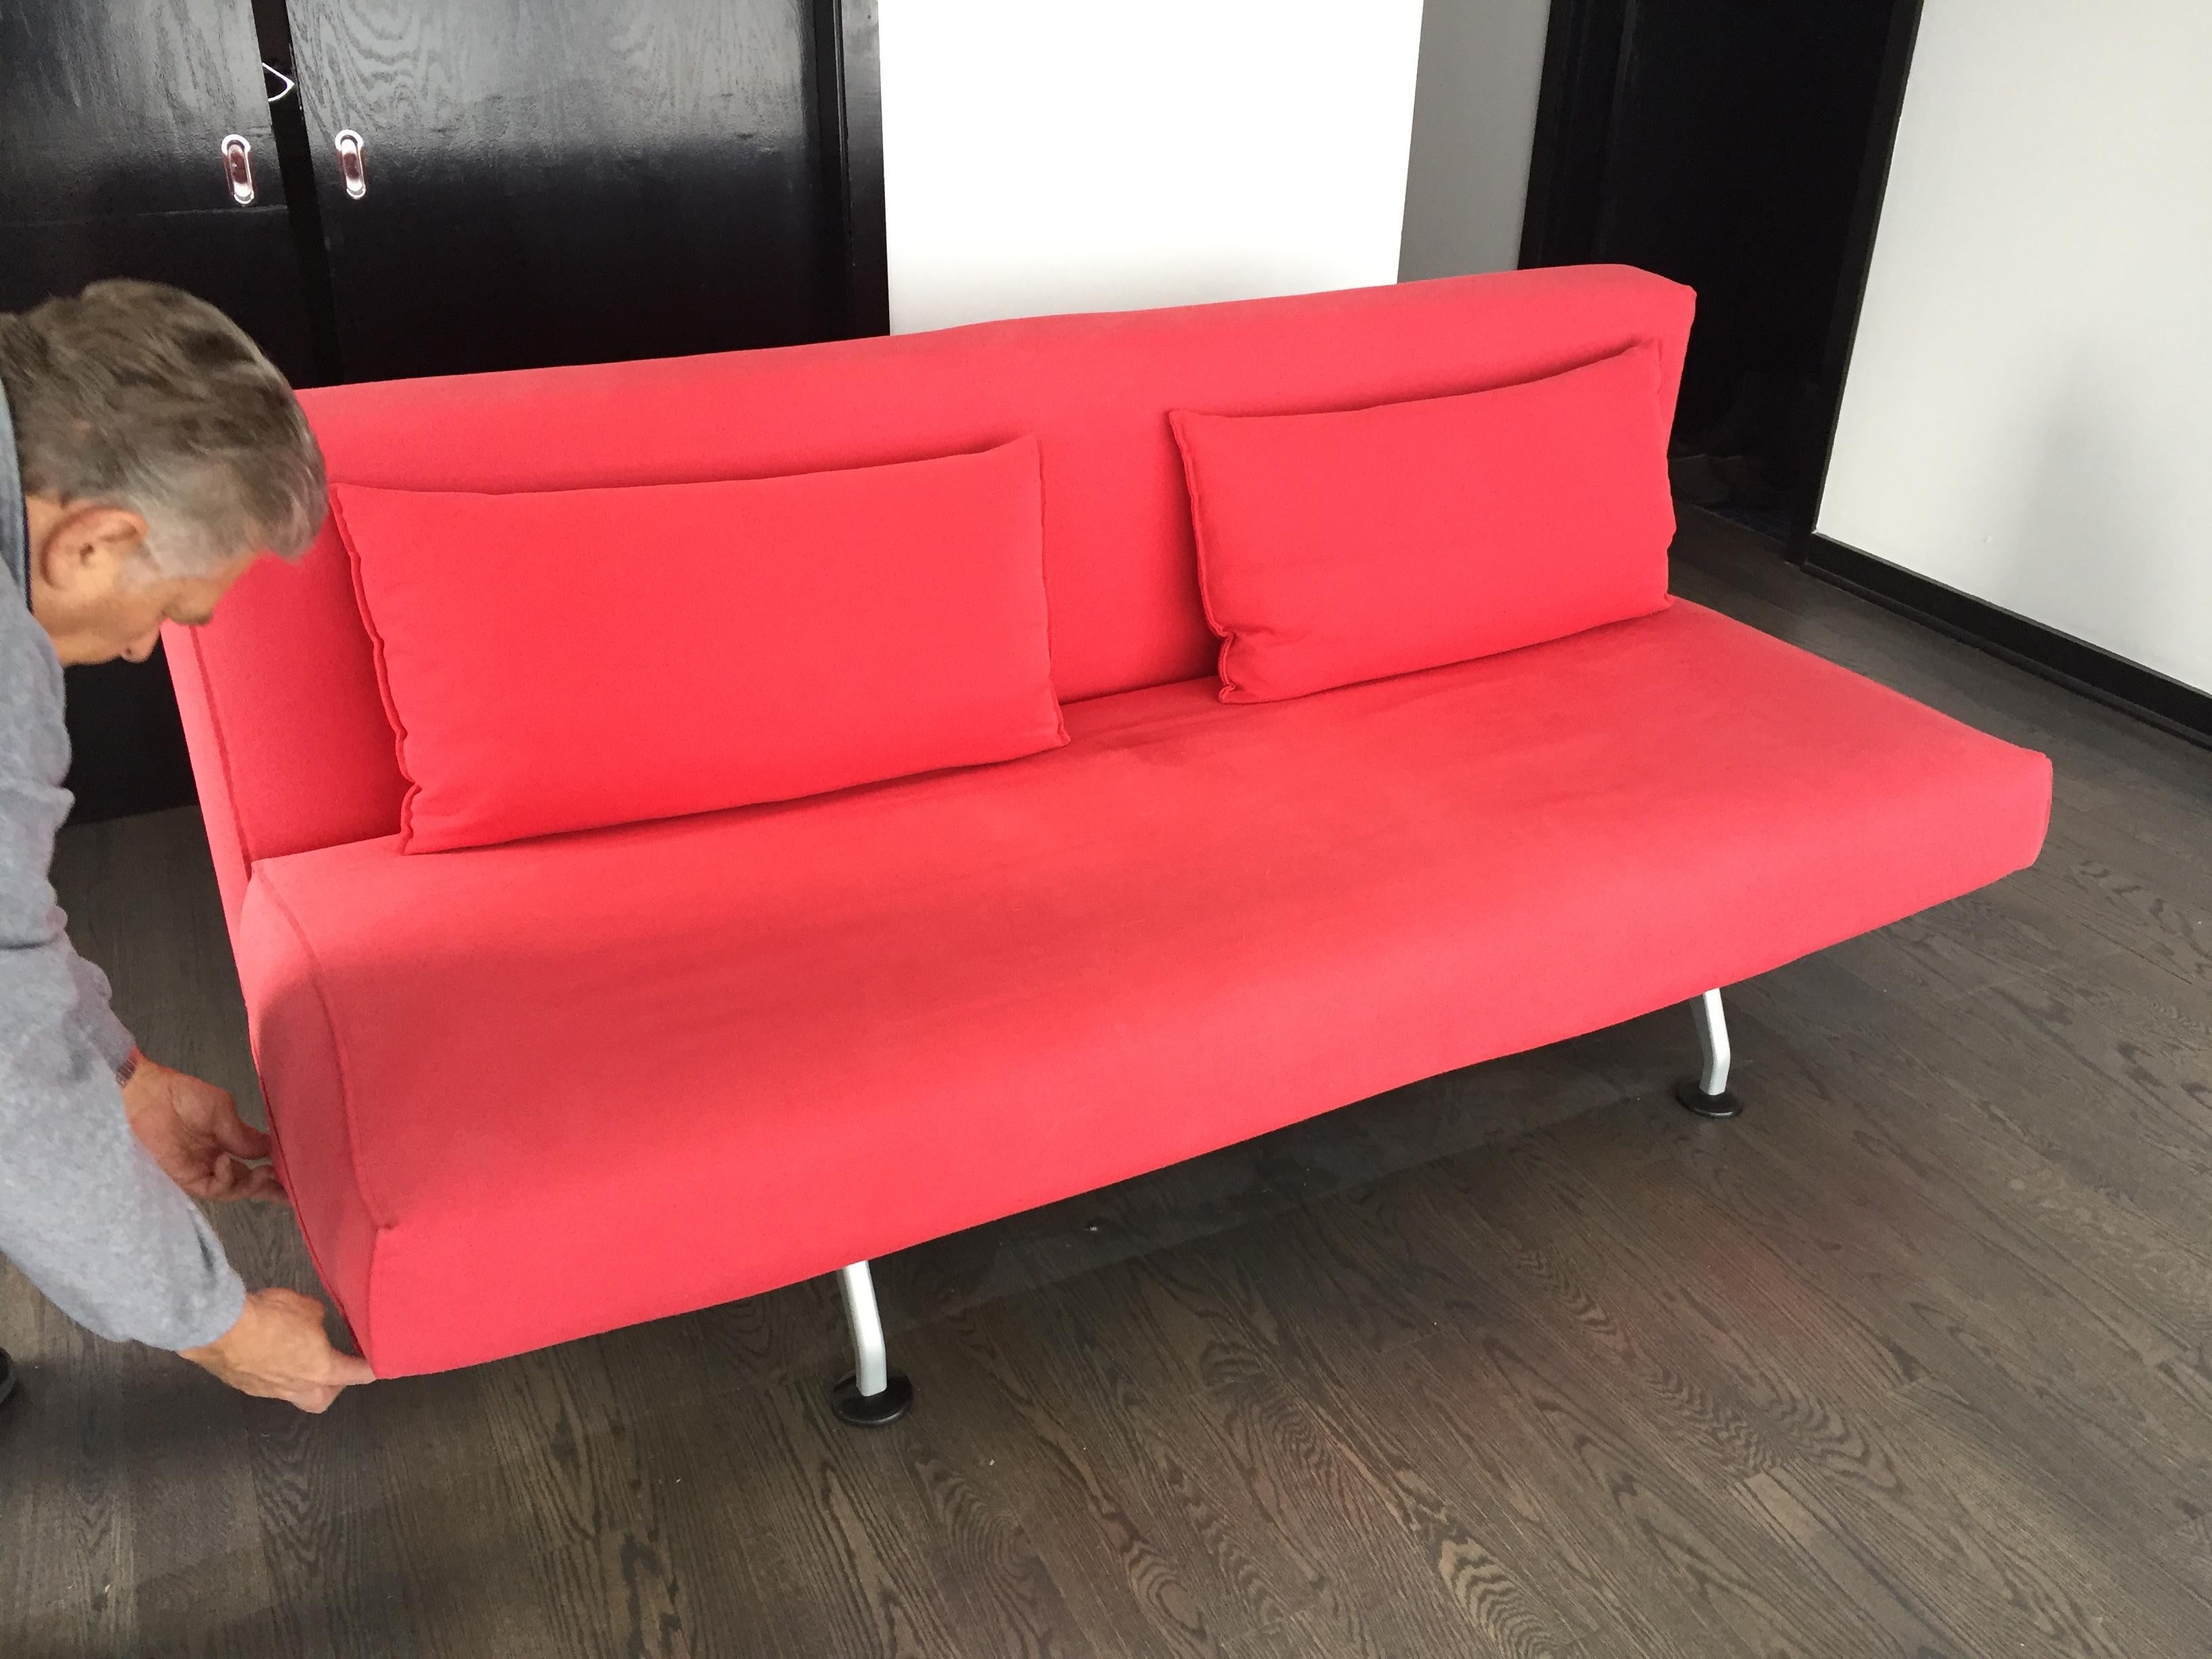 Mid-Century Modern Eames Design Within Reach Sliding Sofa In Good Condition For Sale In Chicago, IL